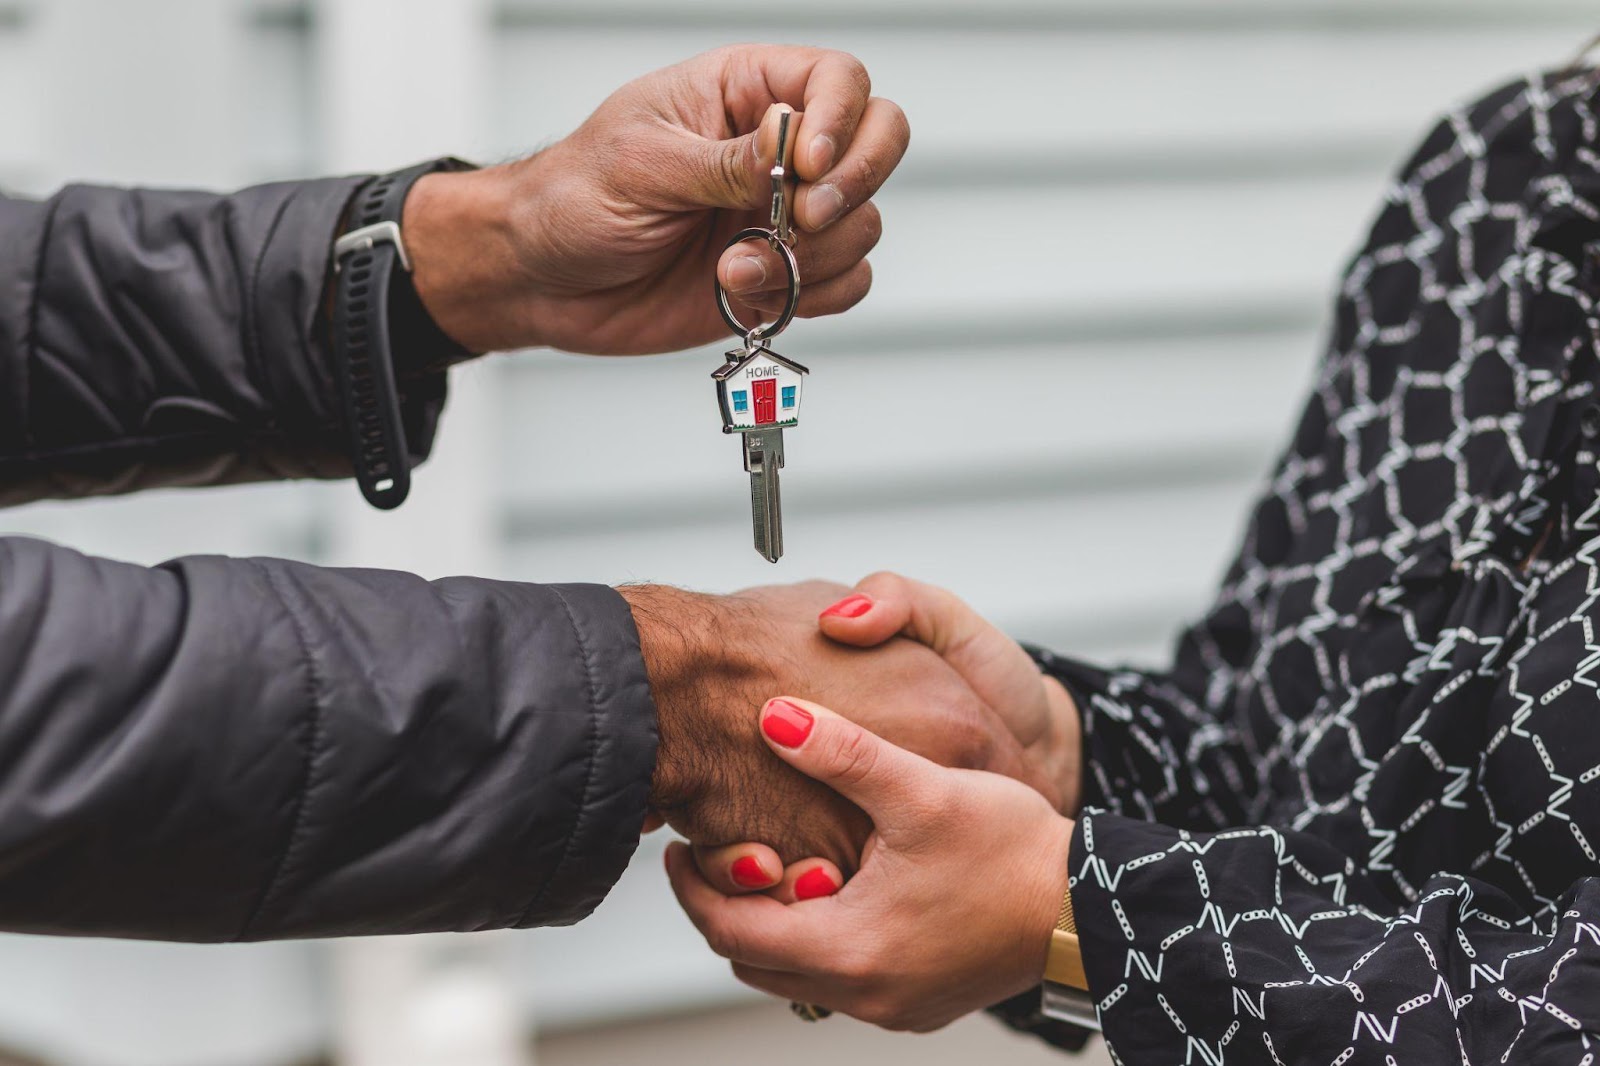 One person handing over house keys to another.